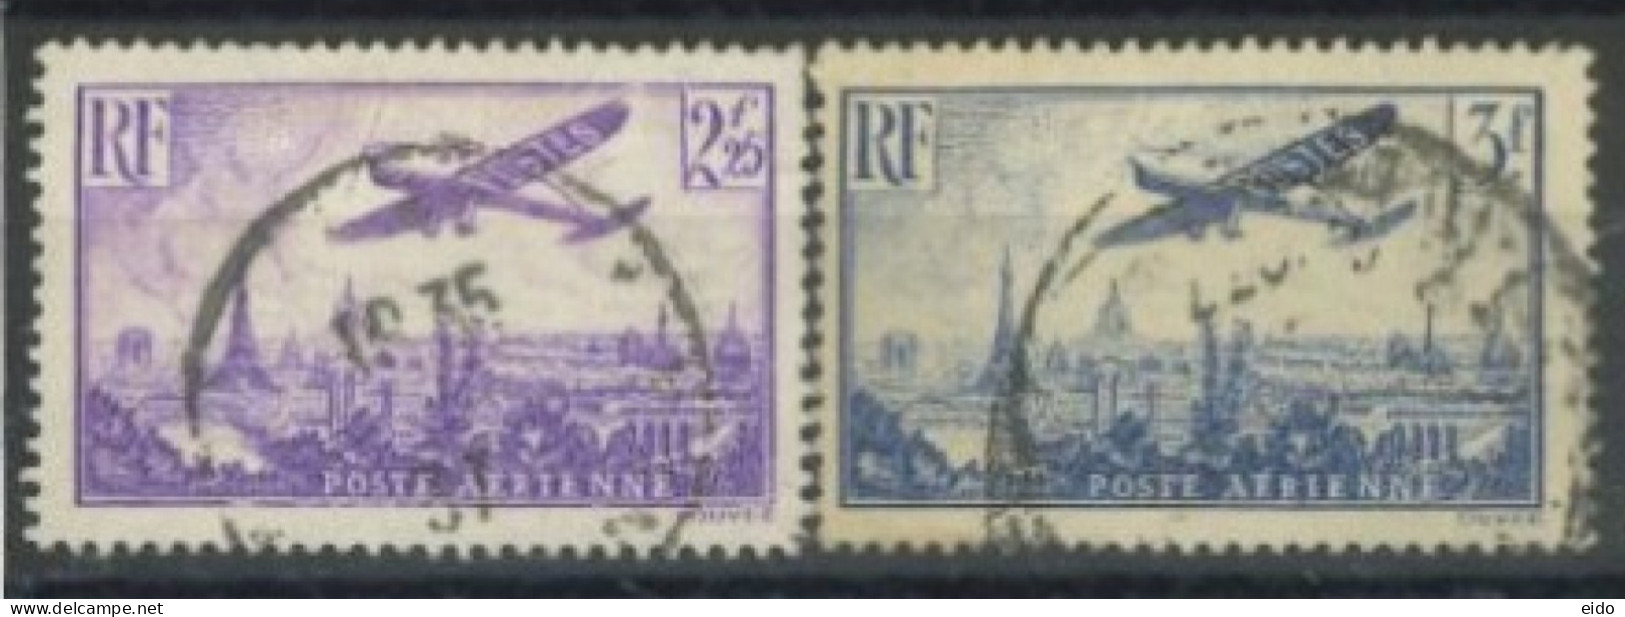 FRANCE - 1936 - PLANE FLYING OVER PARIS STAMPS SET OF 2,  # 10, &12, USED - Usati